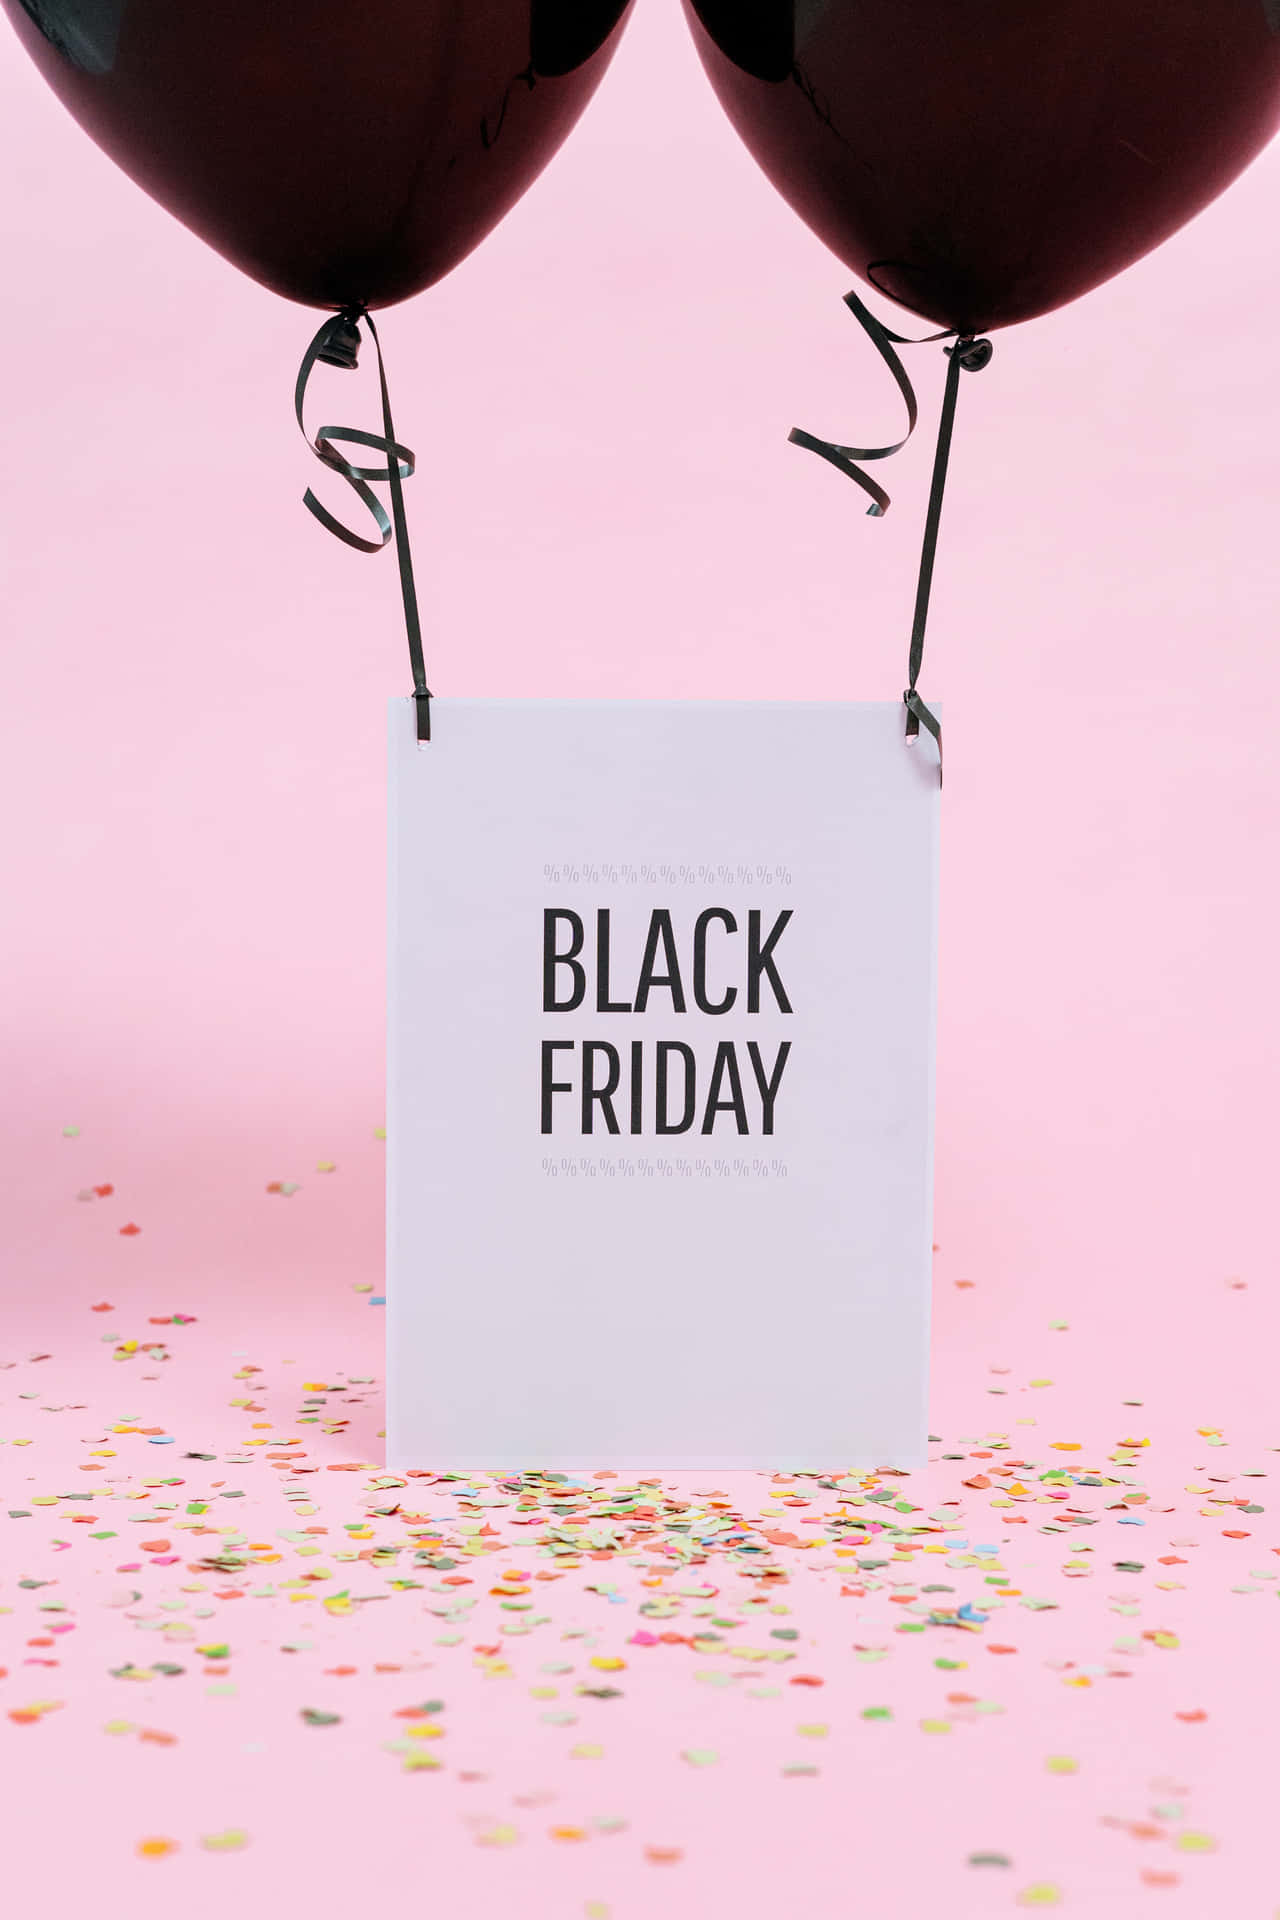 Black Friday Balloons With Confetti On Pink Background Wallpaper